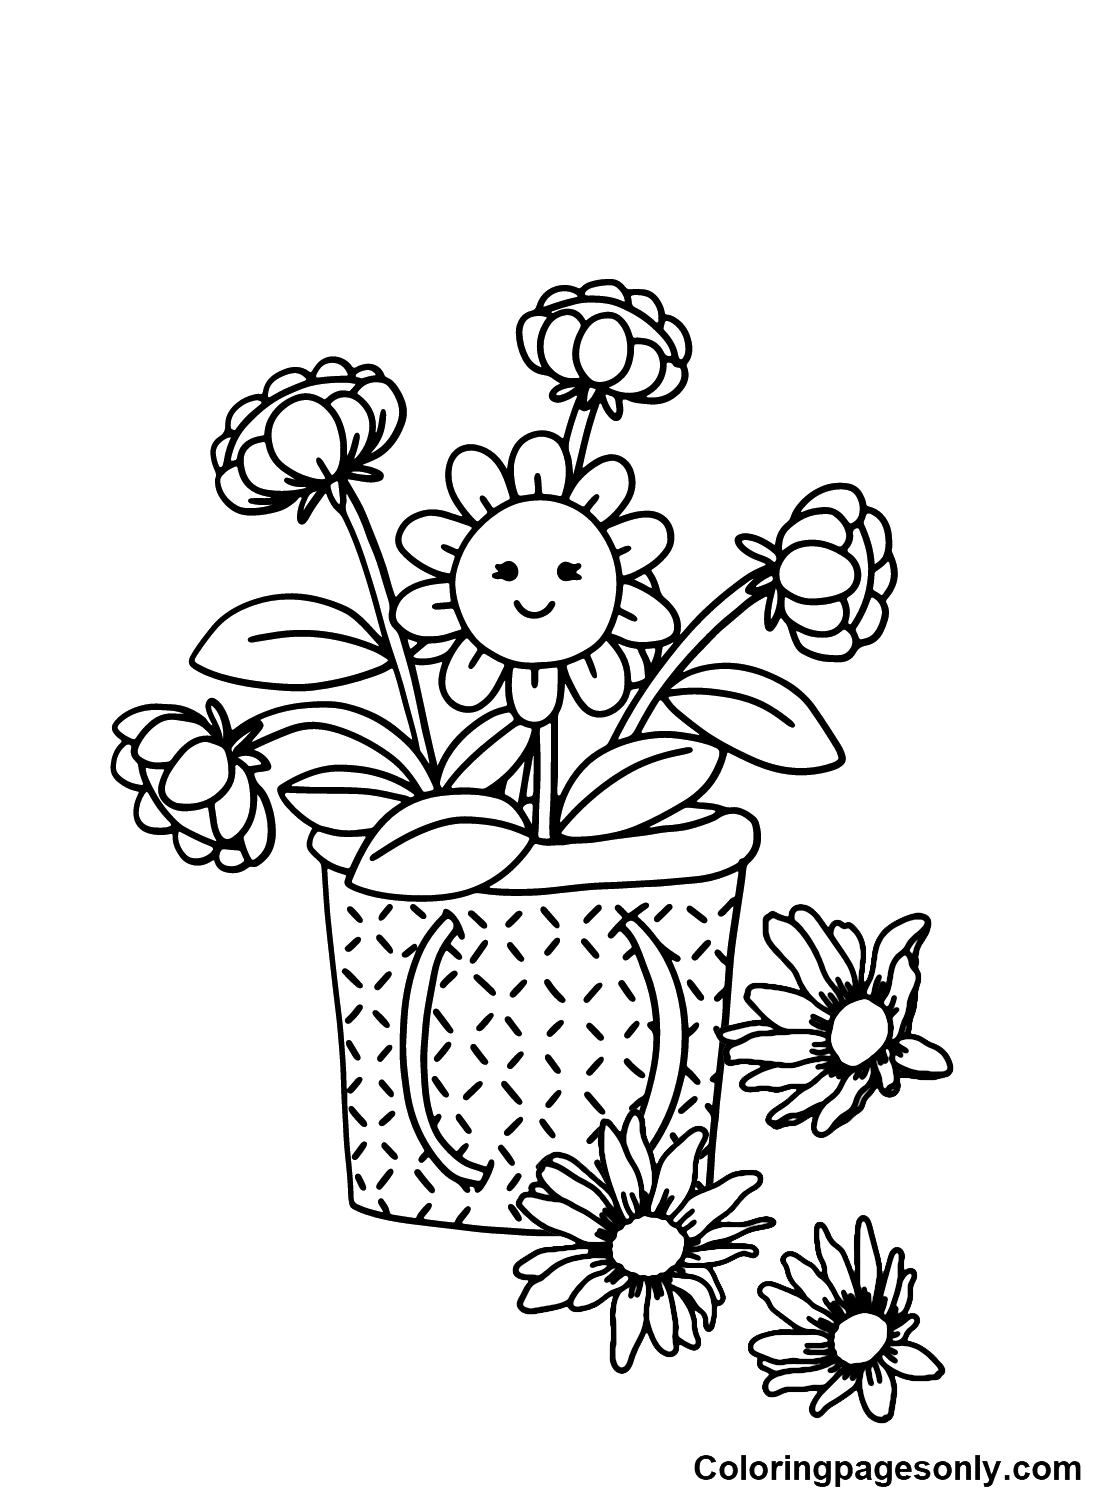 First Day of Spring for Children Coloring Page